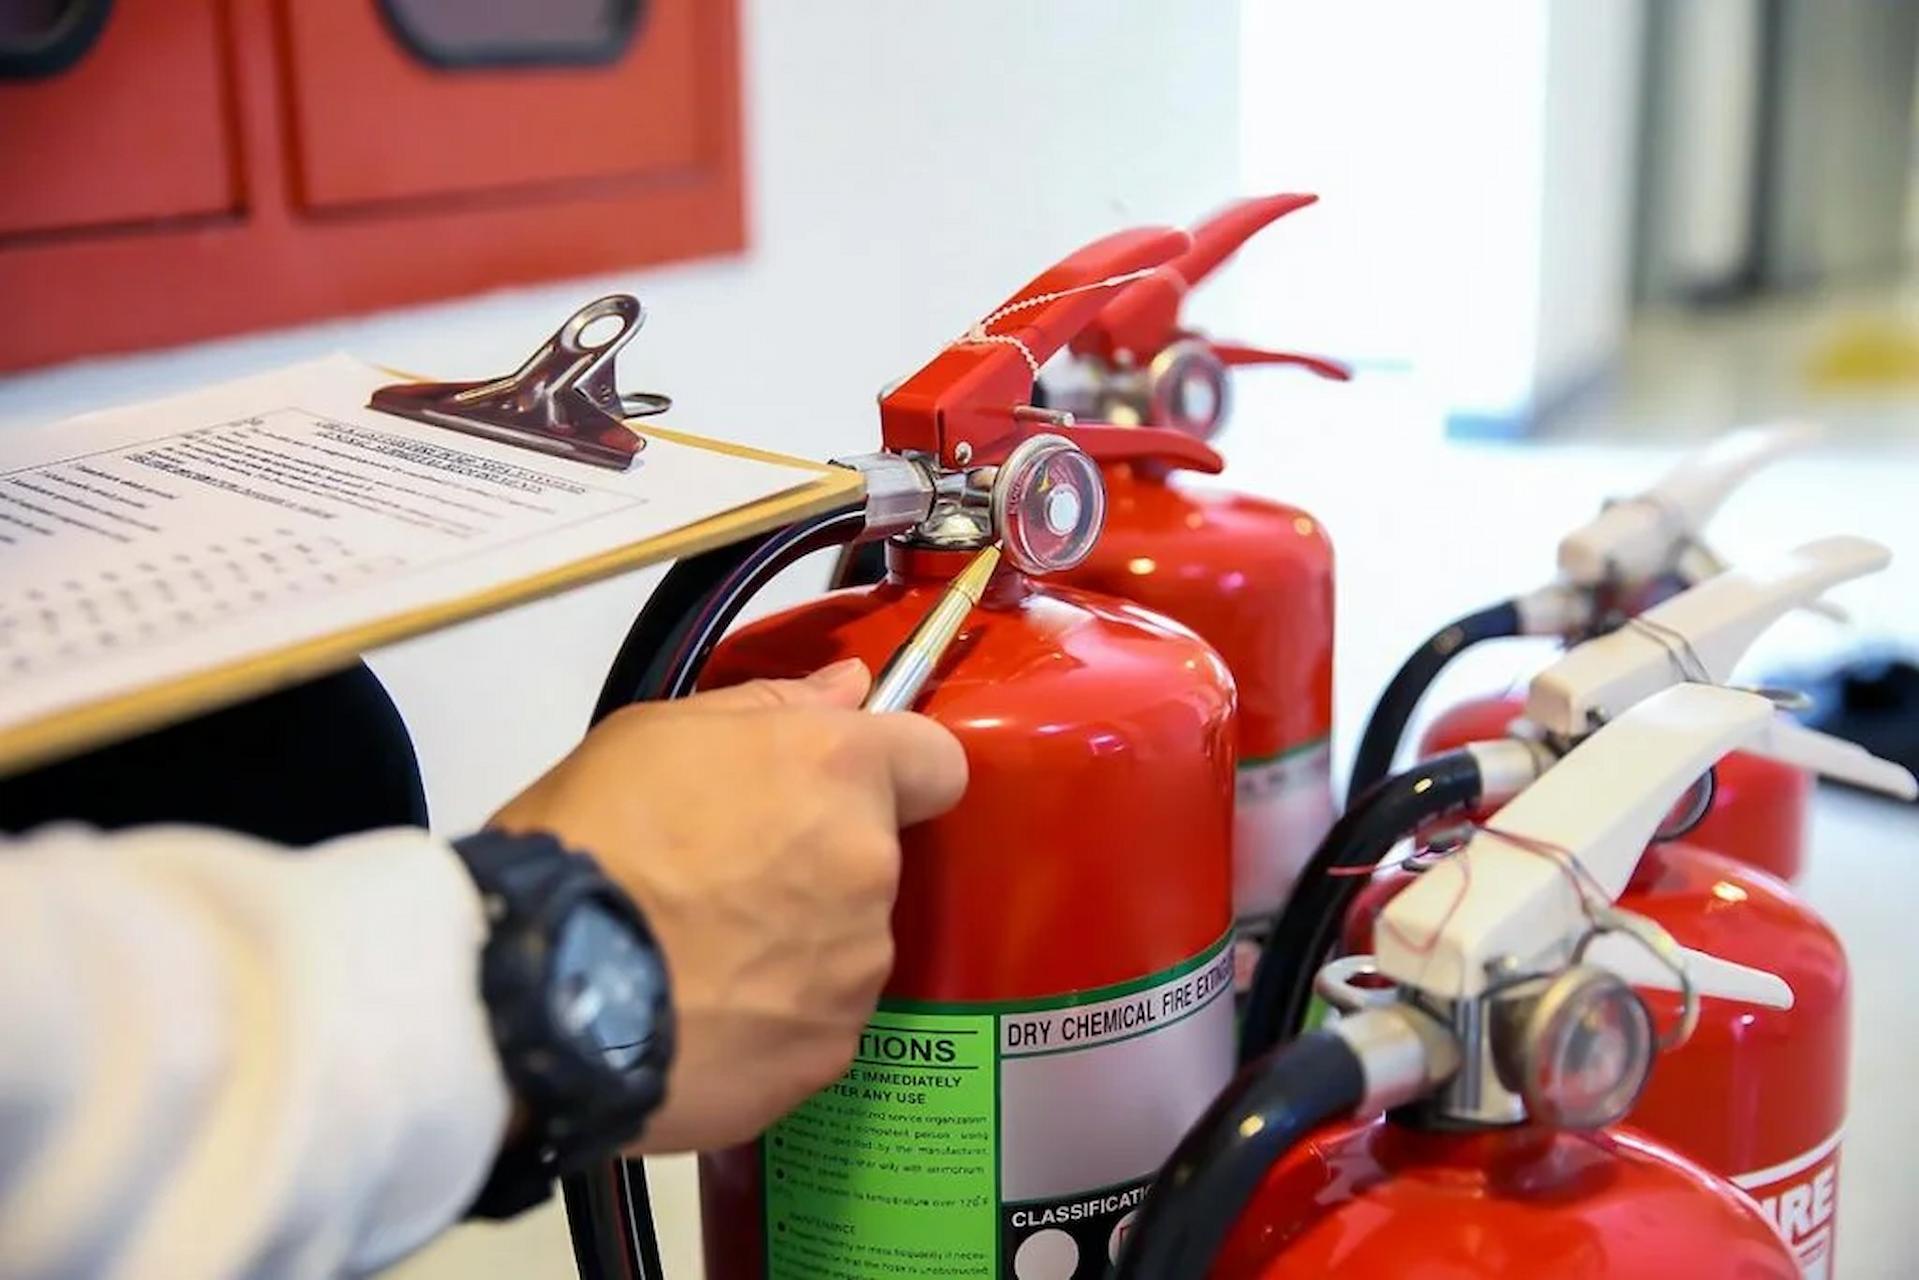 What Is The Purpose Of Hiring Fire Risk Assessment Experts?